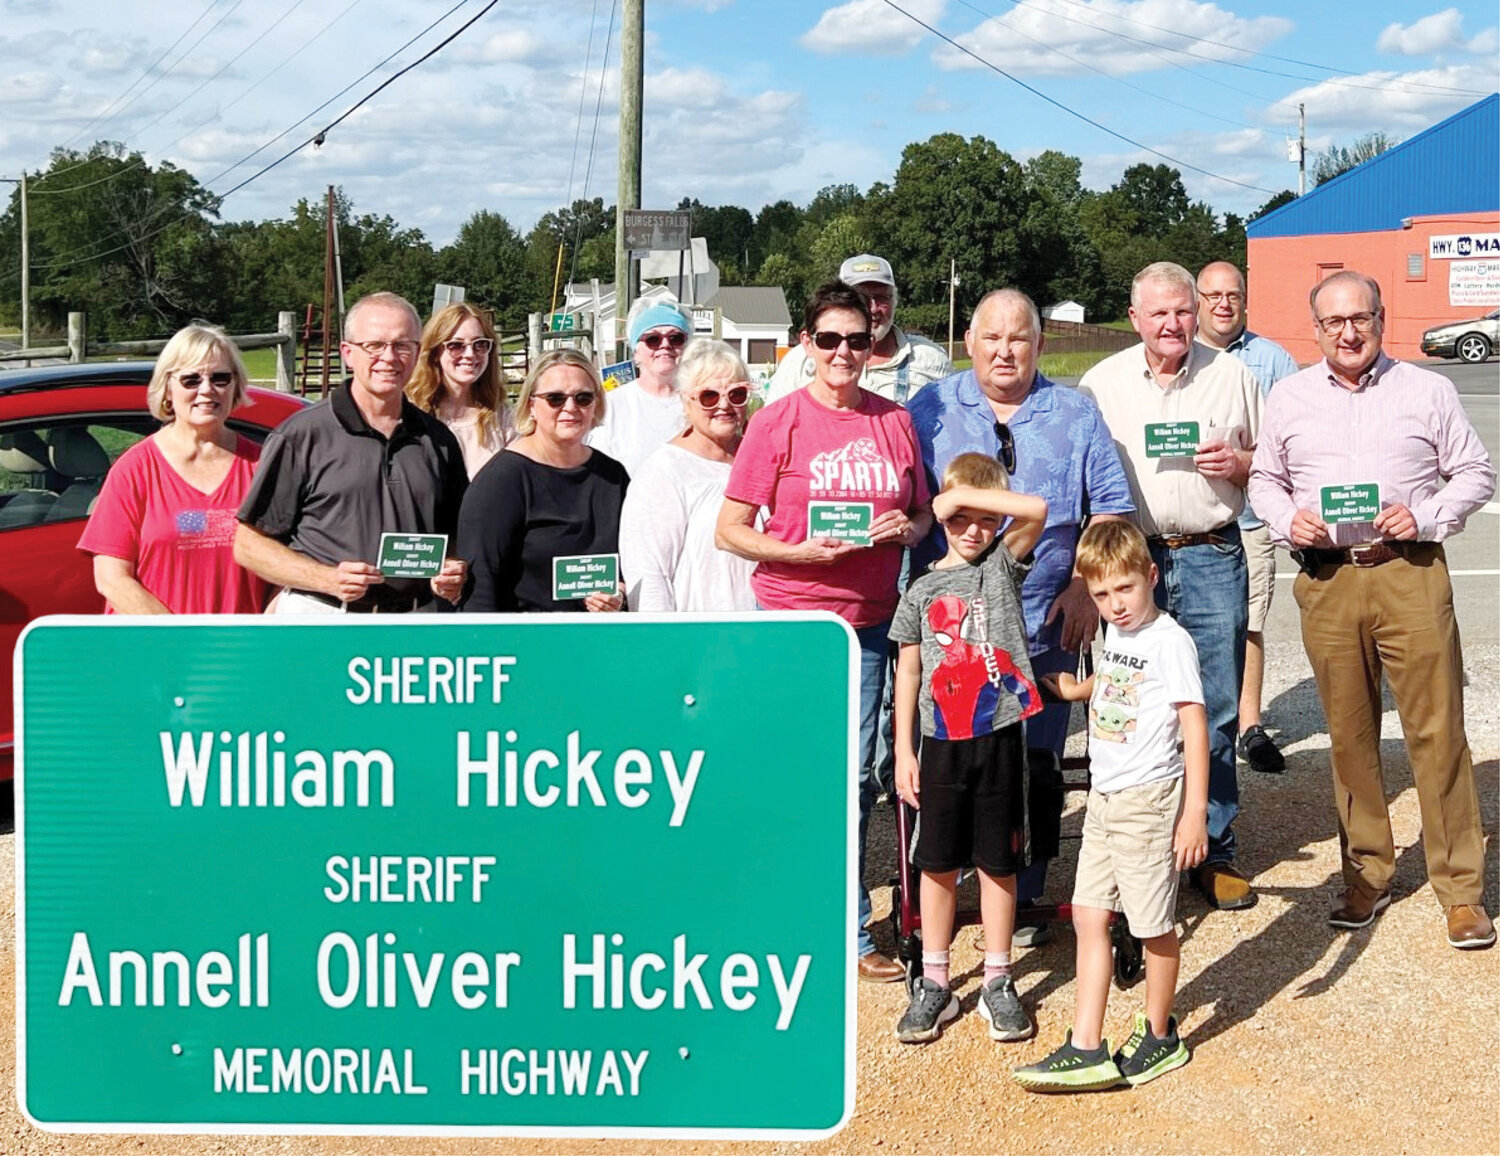 The family members of William and Annell Hickey, along with several dignitaries, gather to dedicate a section of State Highway 136 (Old Kentucky Road) to the husband and wife who both served as sheriffs.